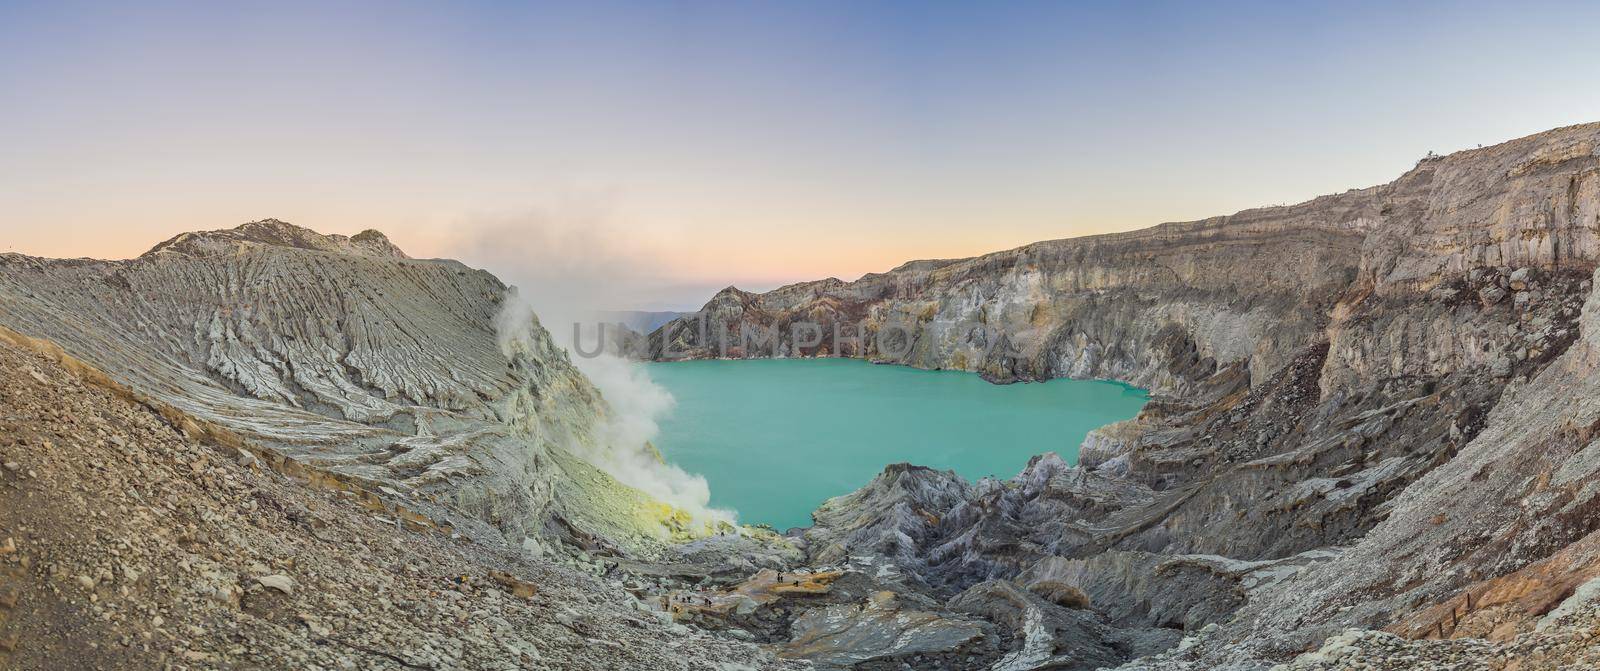 Panoramic shot of the Ijen volcano or Kawah Ijen on the Indonesian language. Famous volcano containing the biggest in the world acid lake and sulfur mining spot at the place where volcanic gasses come from the volcano by galitskaya